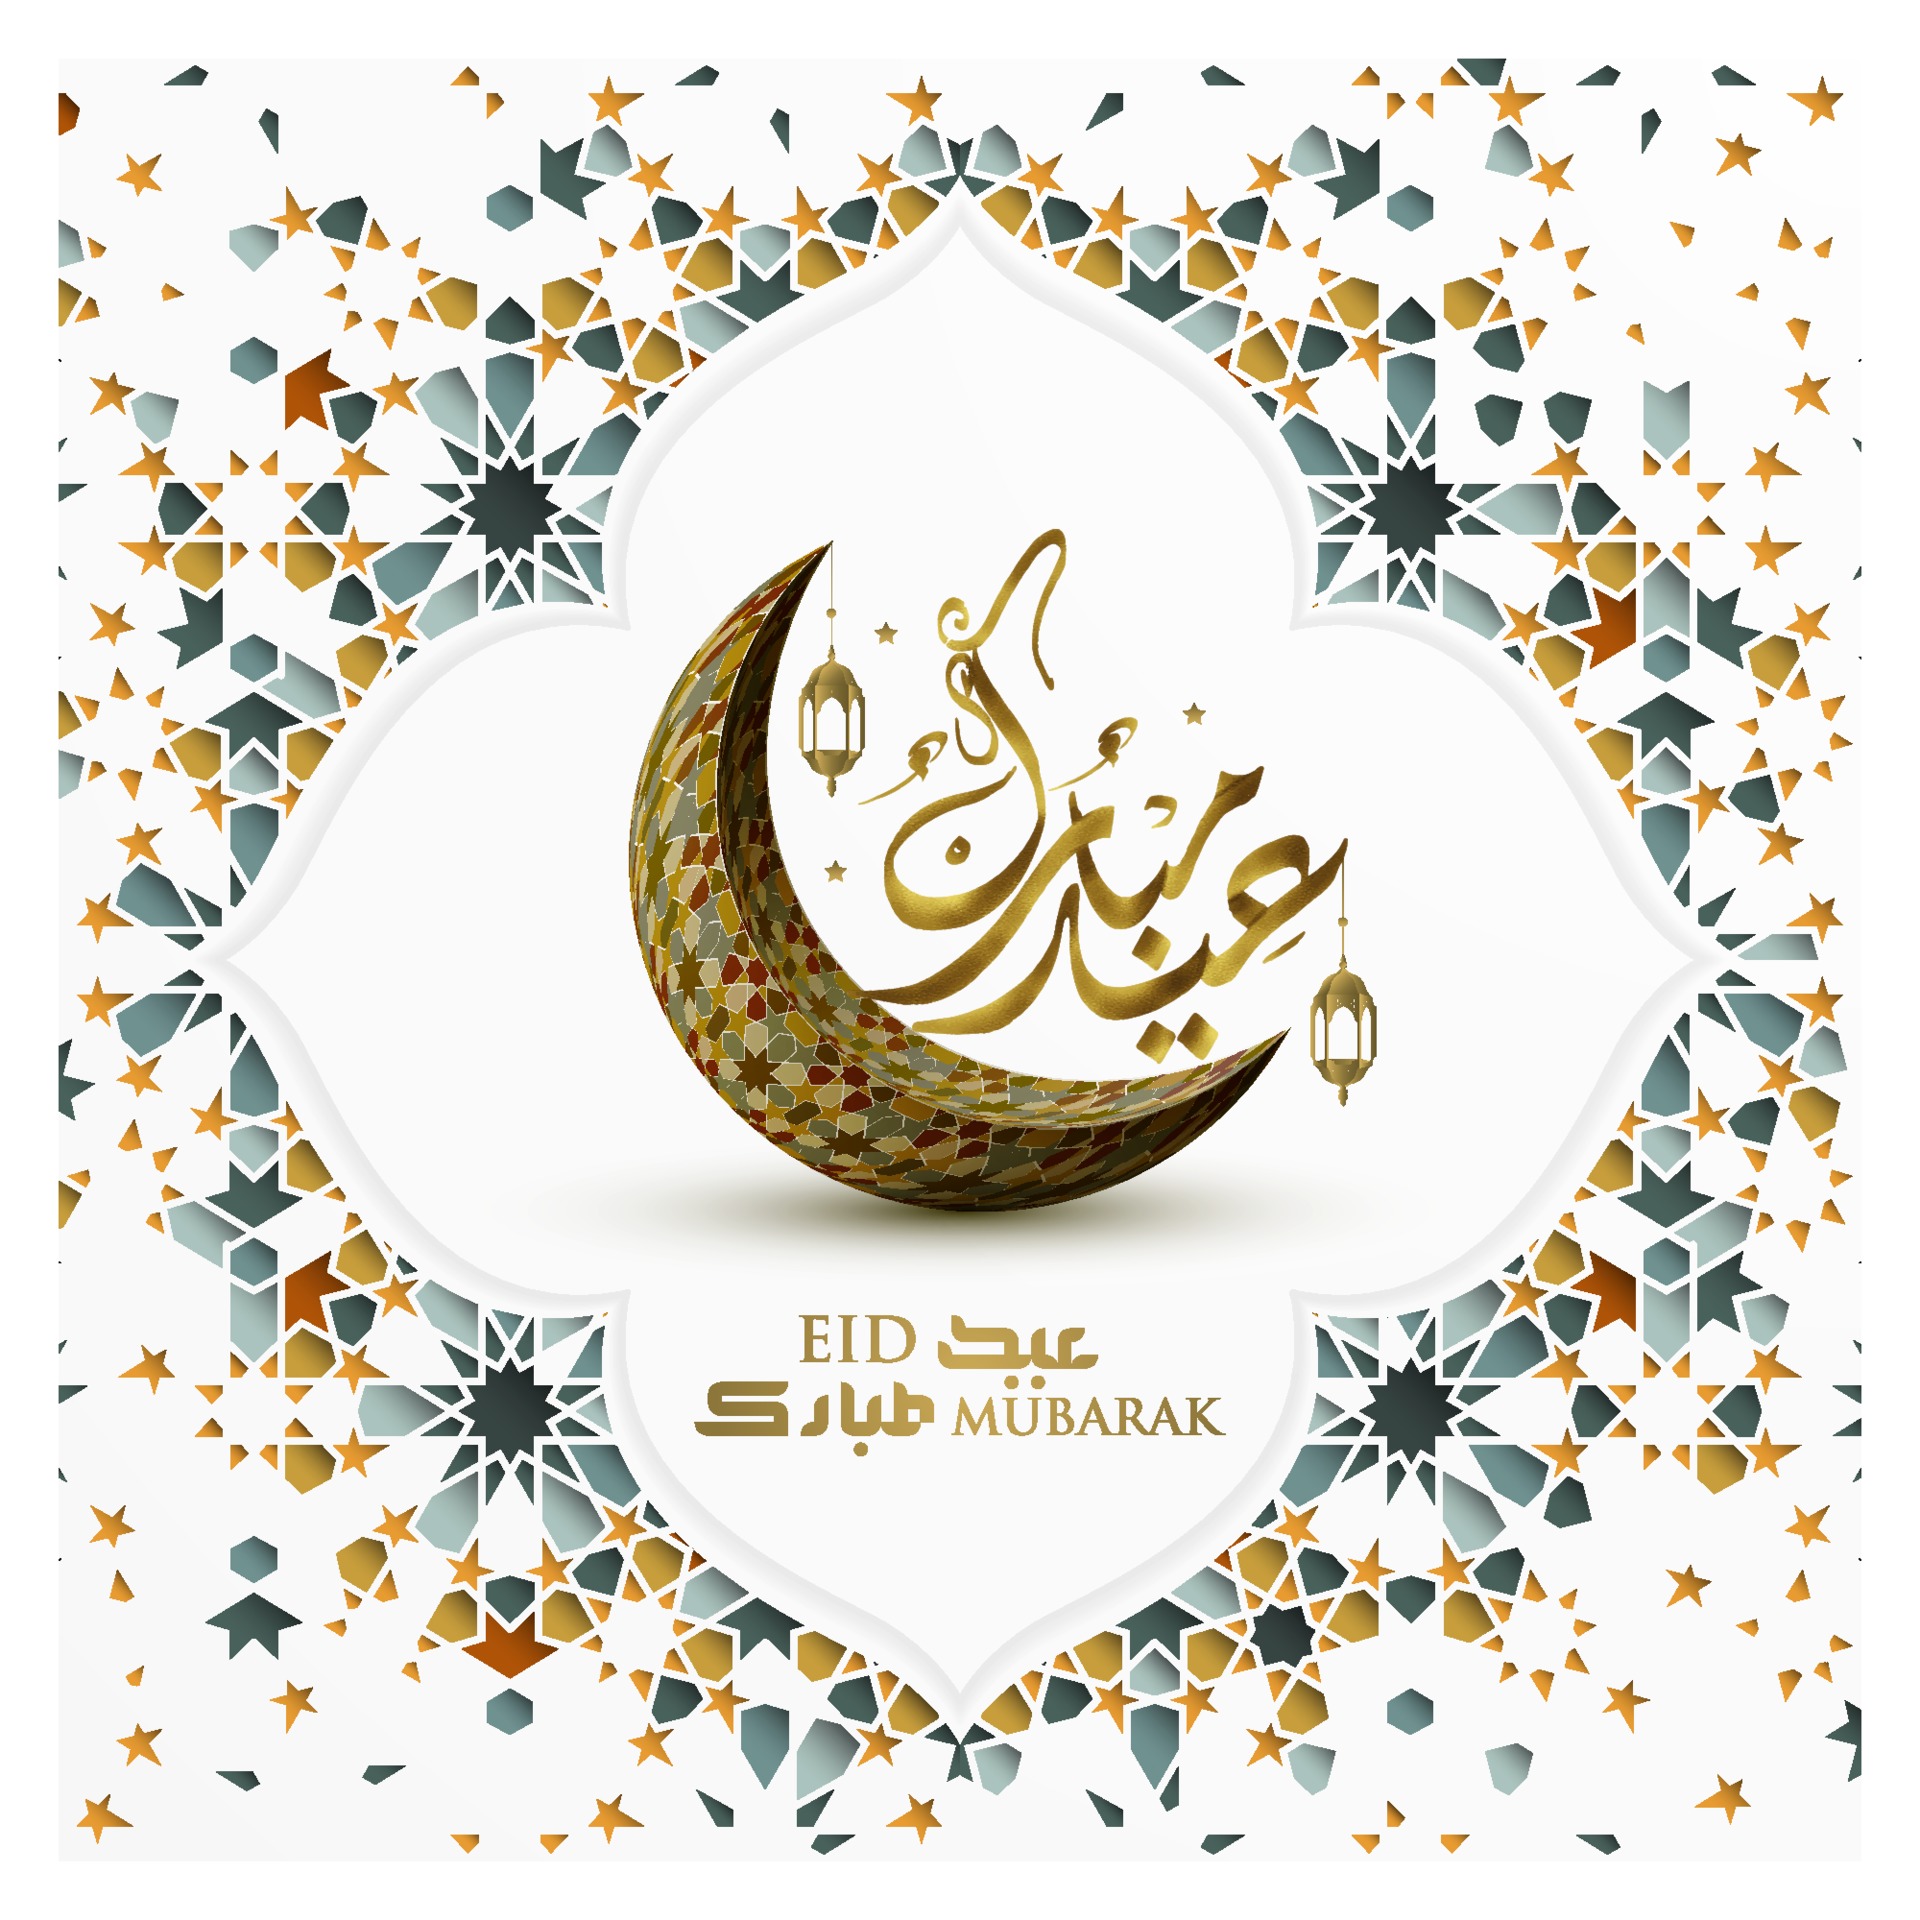 Eid Mubarak Greeting Islamic Illustration Background Vector Design With Beautiful Lanterns Moon And Arabic Calligraphy 2145503 Download Free Vectors Clipart Graphics Vector Art